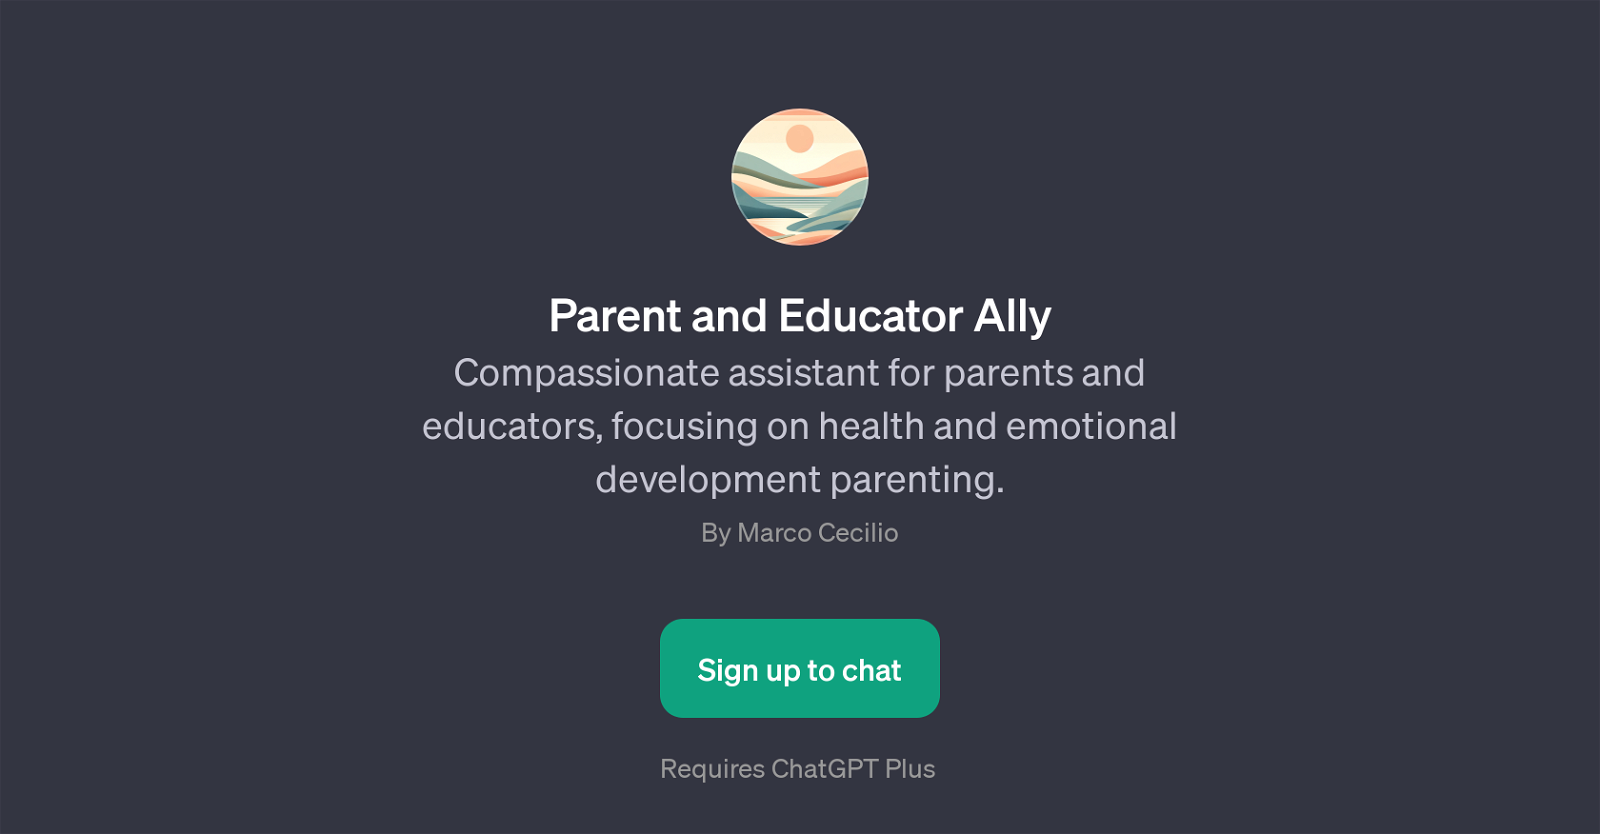 Parent and Educator Ally website